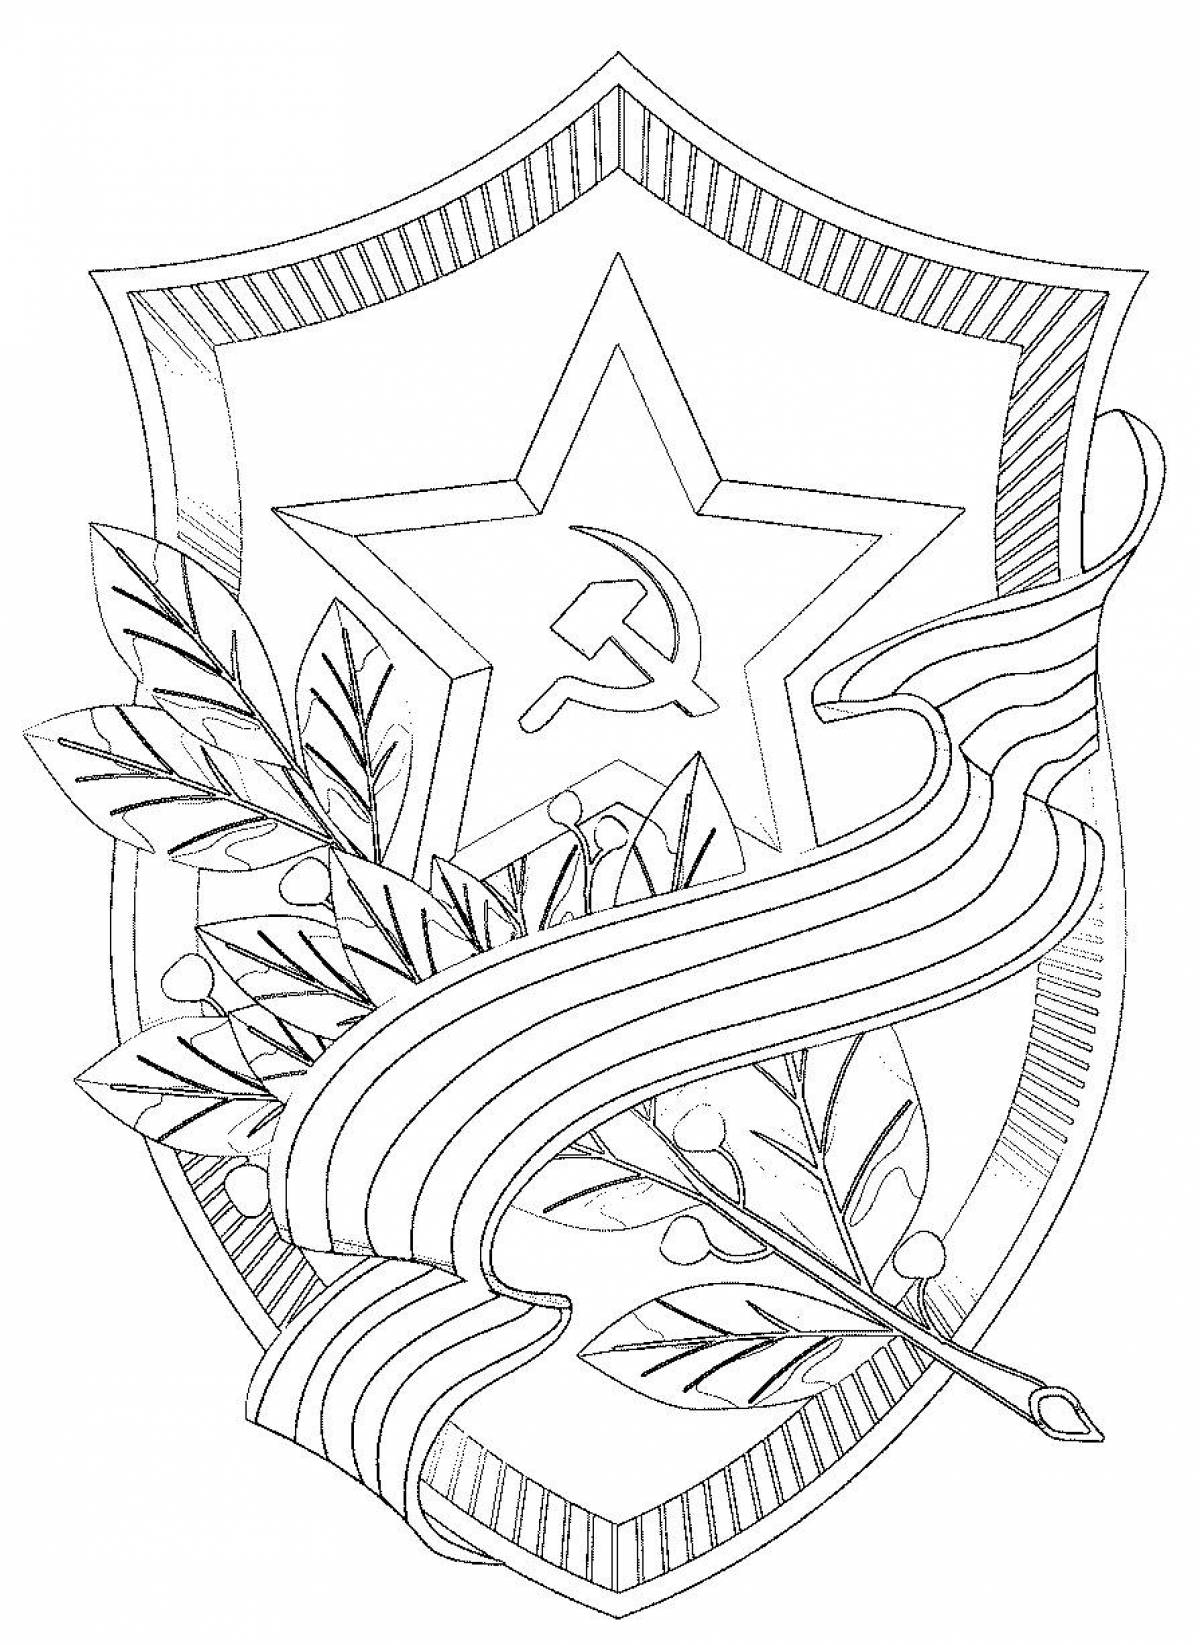 Coloring page inviting St. George ribbon